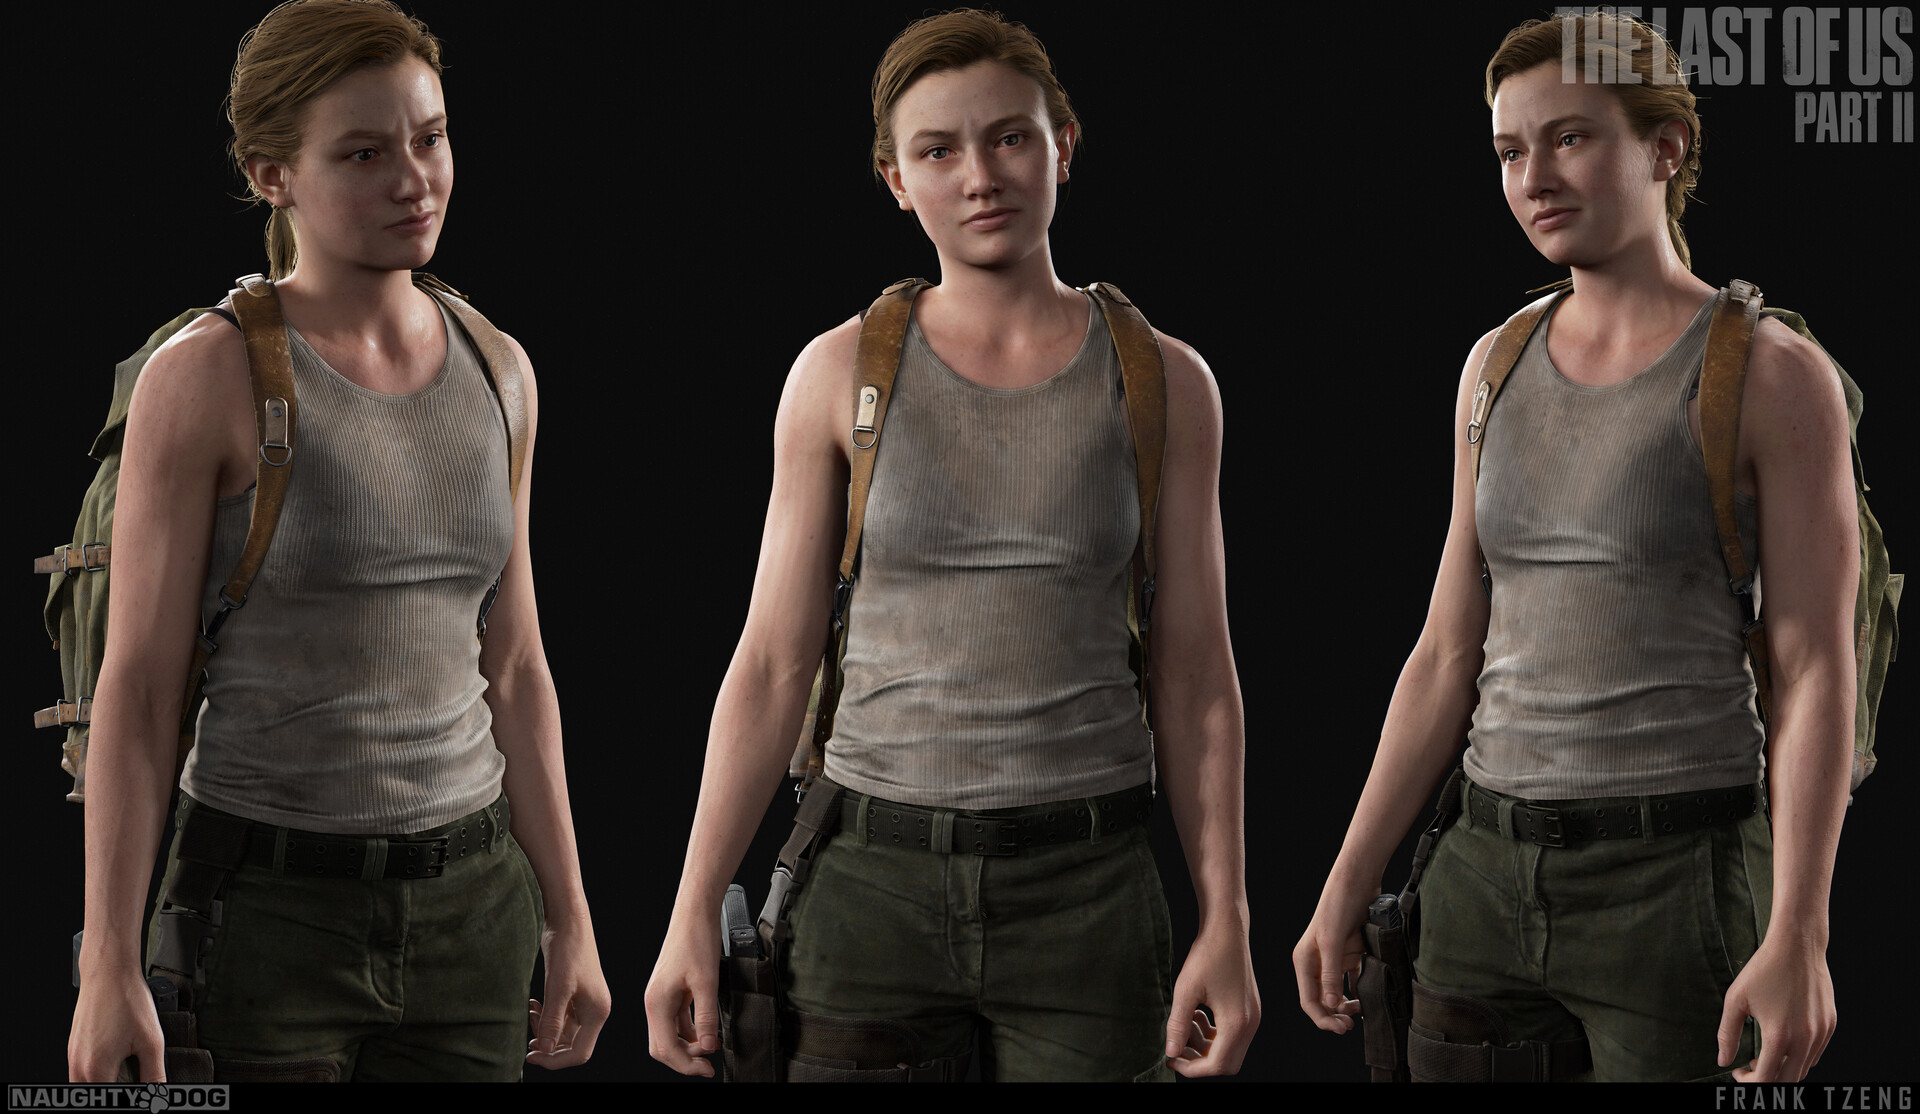 Is Abby being trans relevant to the story of The Last Of Us 2? - Quora